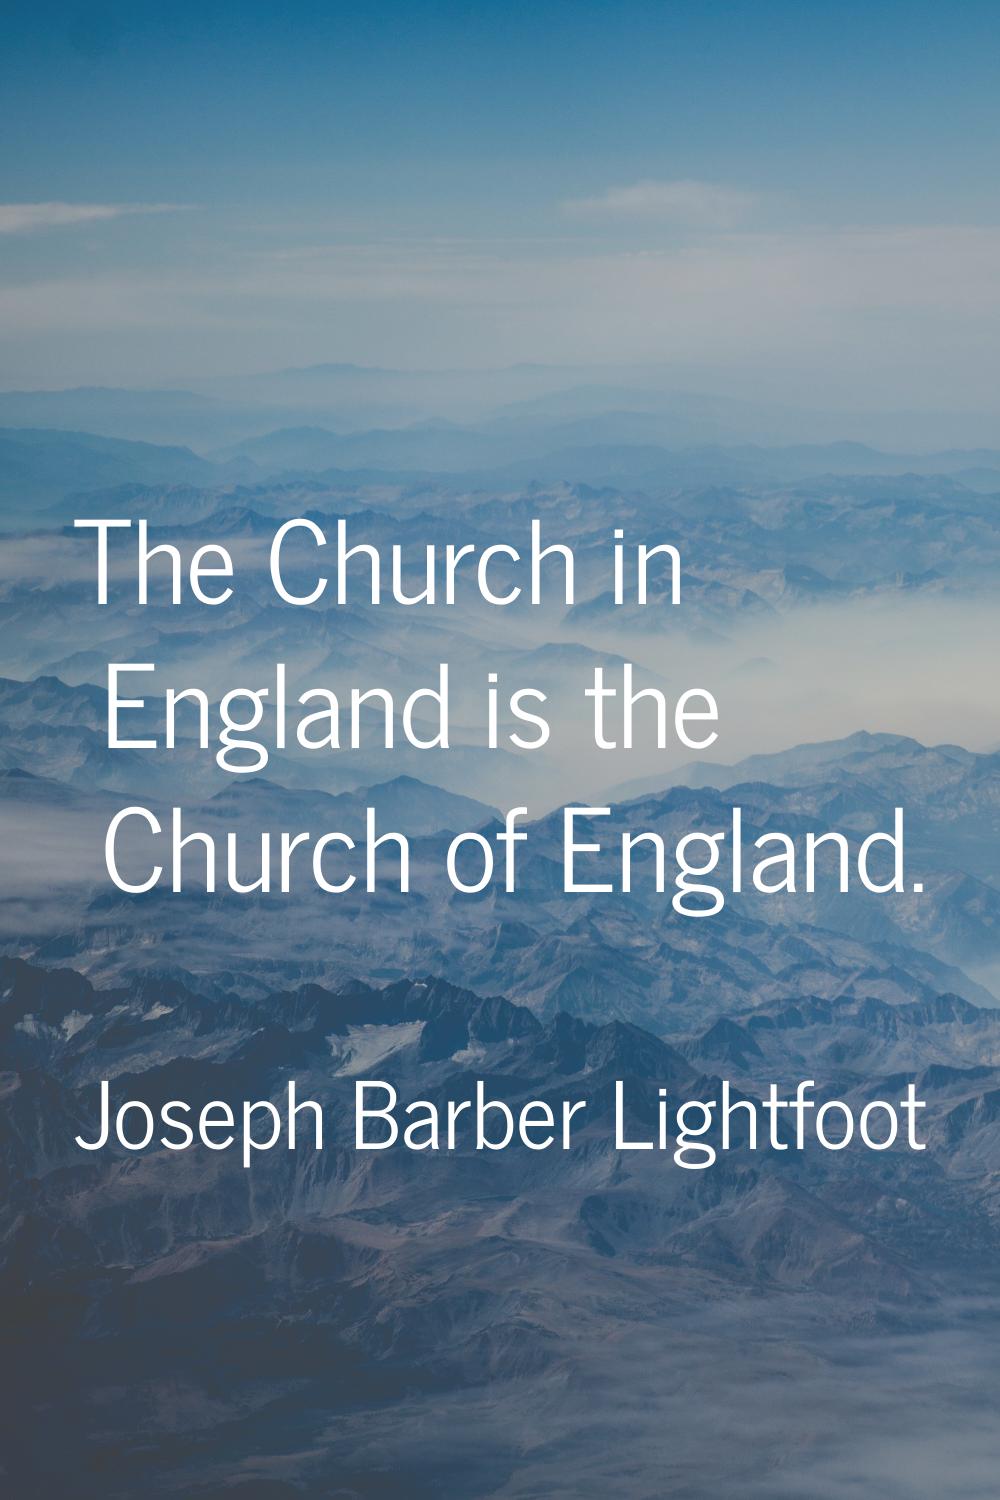 The Church in England is the Church of England.